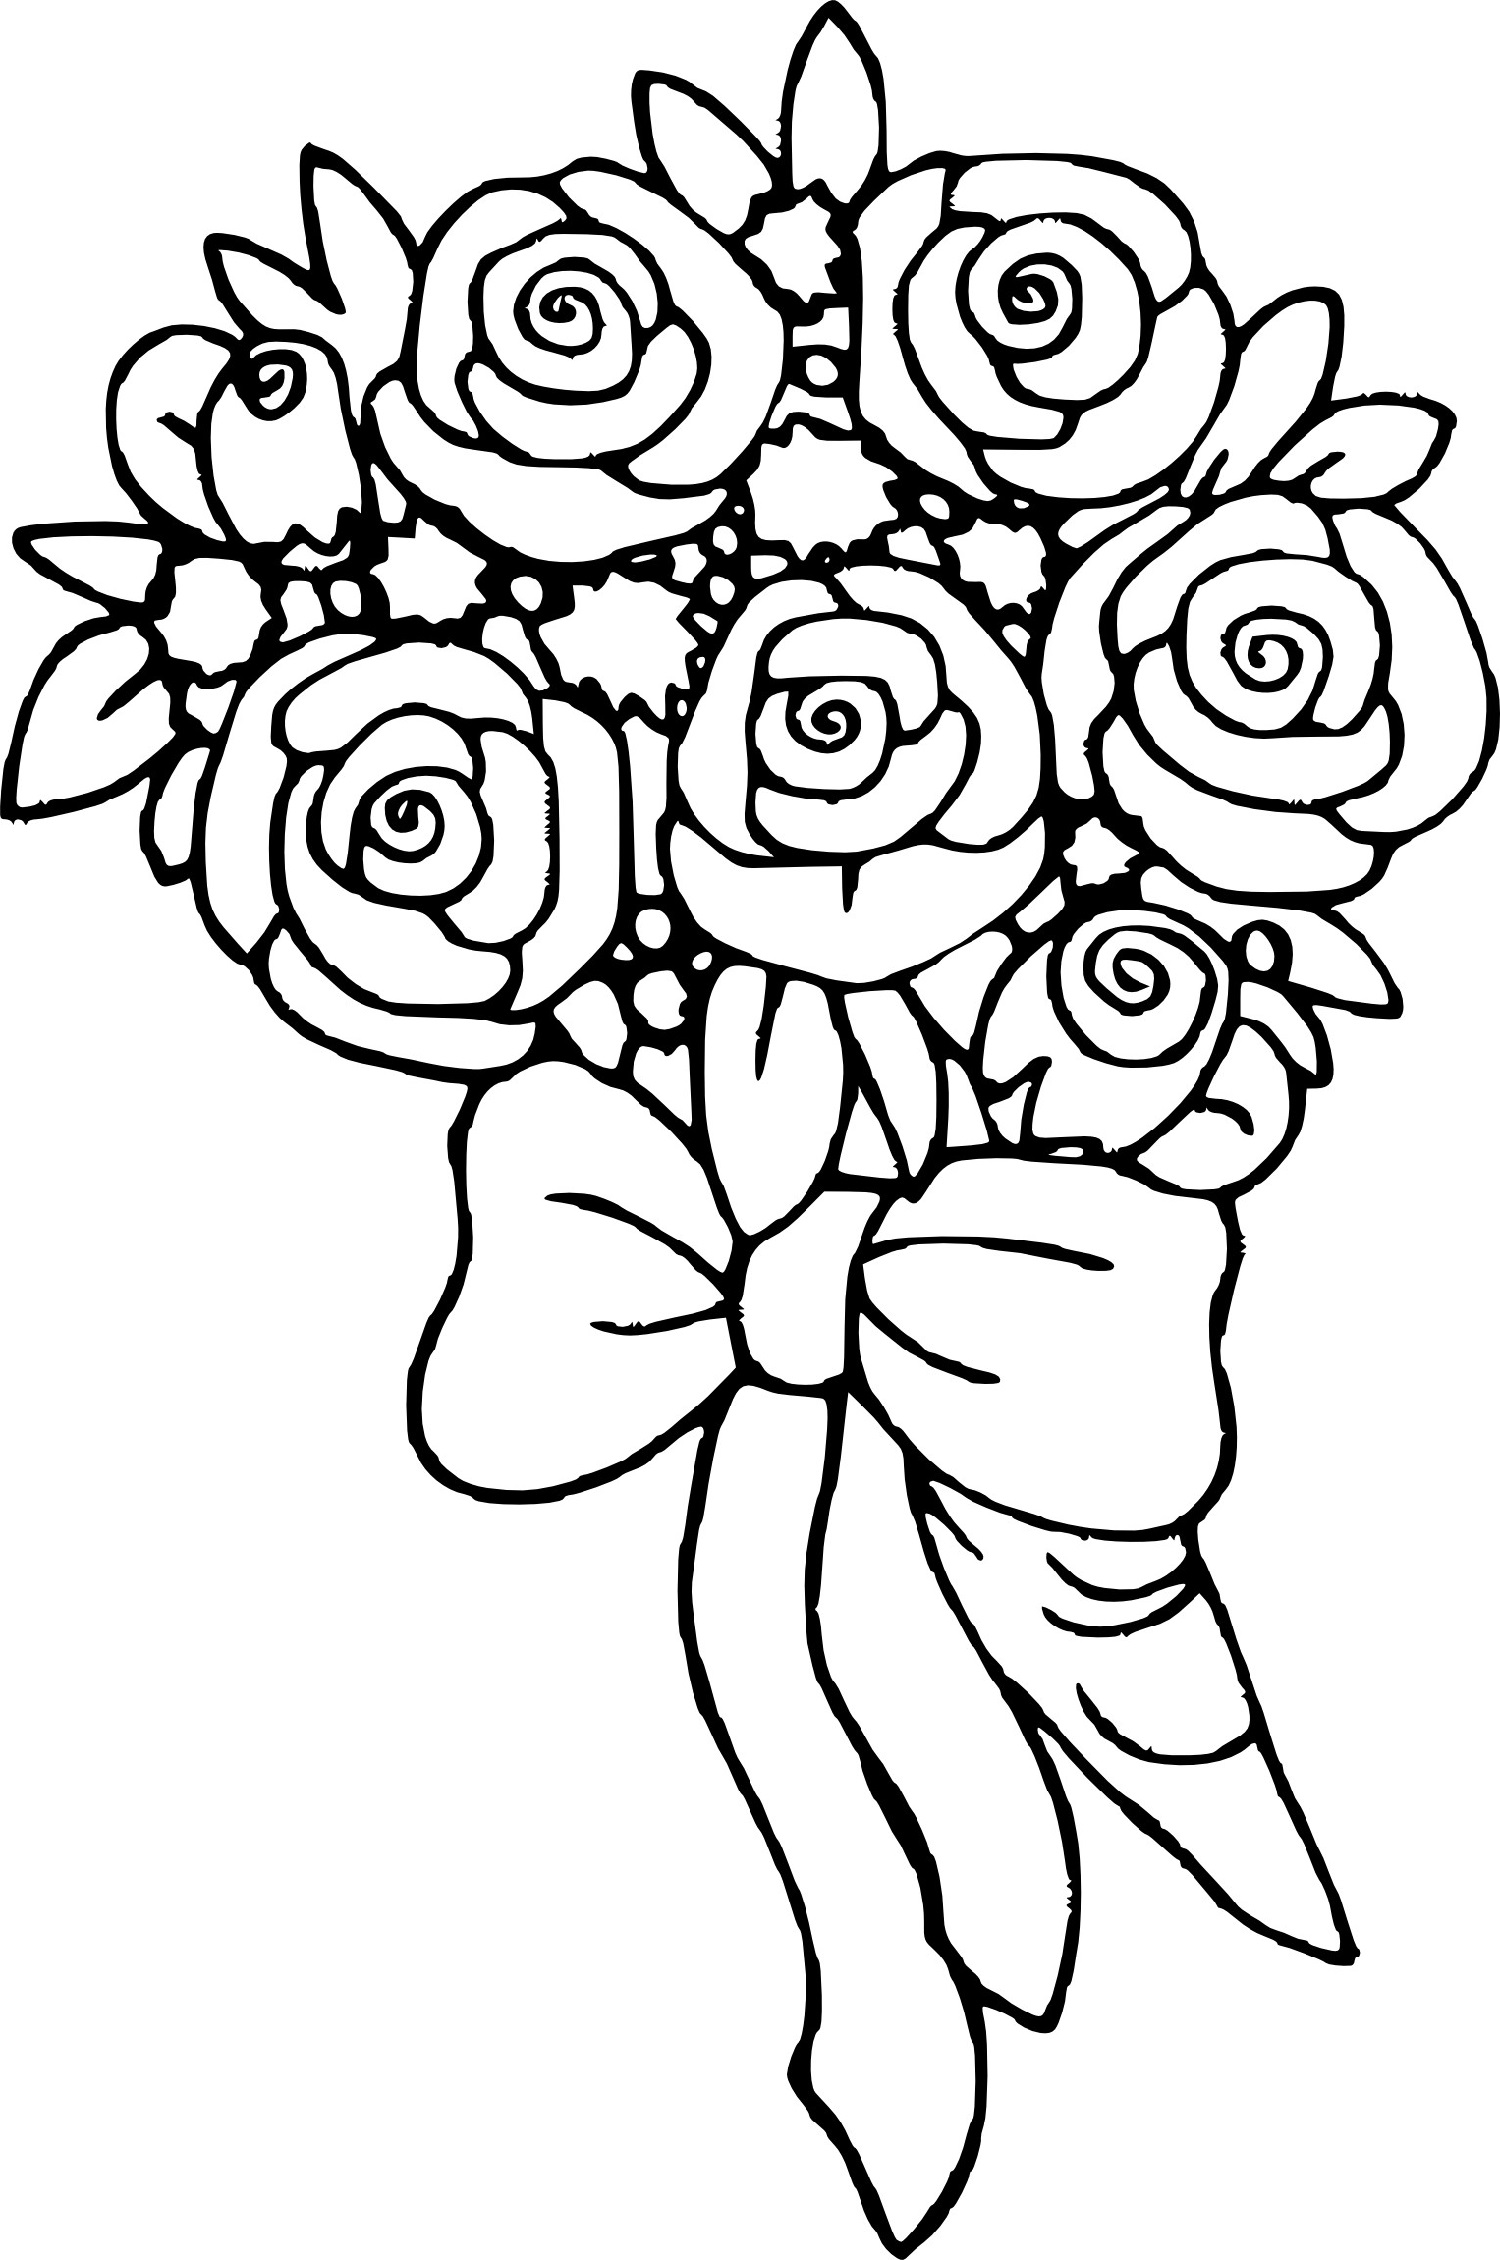 coloring-pages-rose-coloring-realistic-flower-bouquet